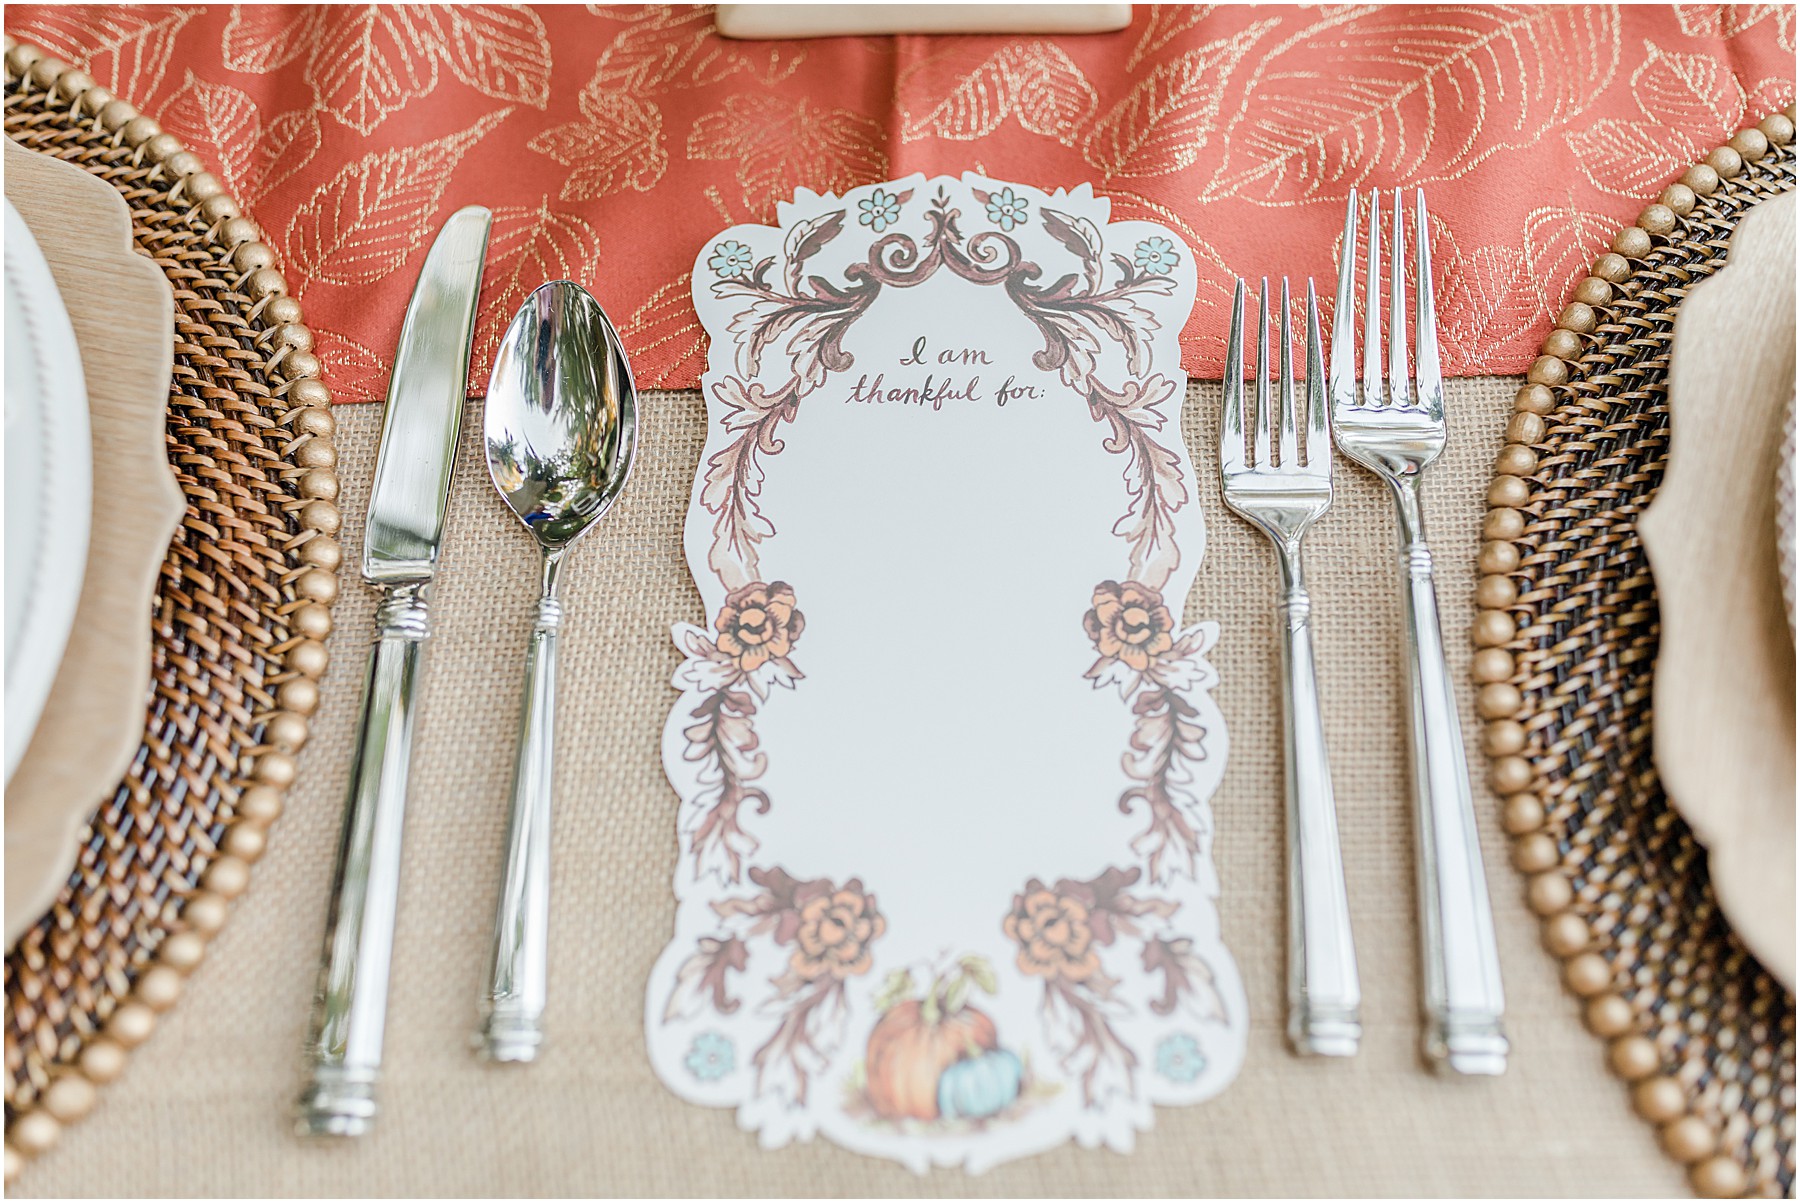 Smith's of Dublin, Fall Table, Thanksgiving Table, Tablescapes, dining al fresco